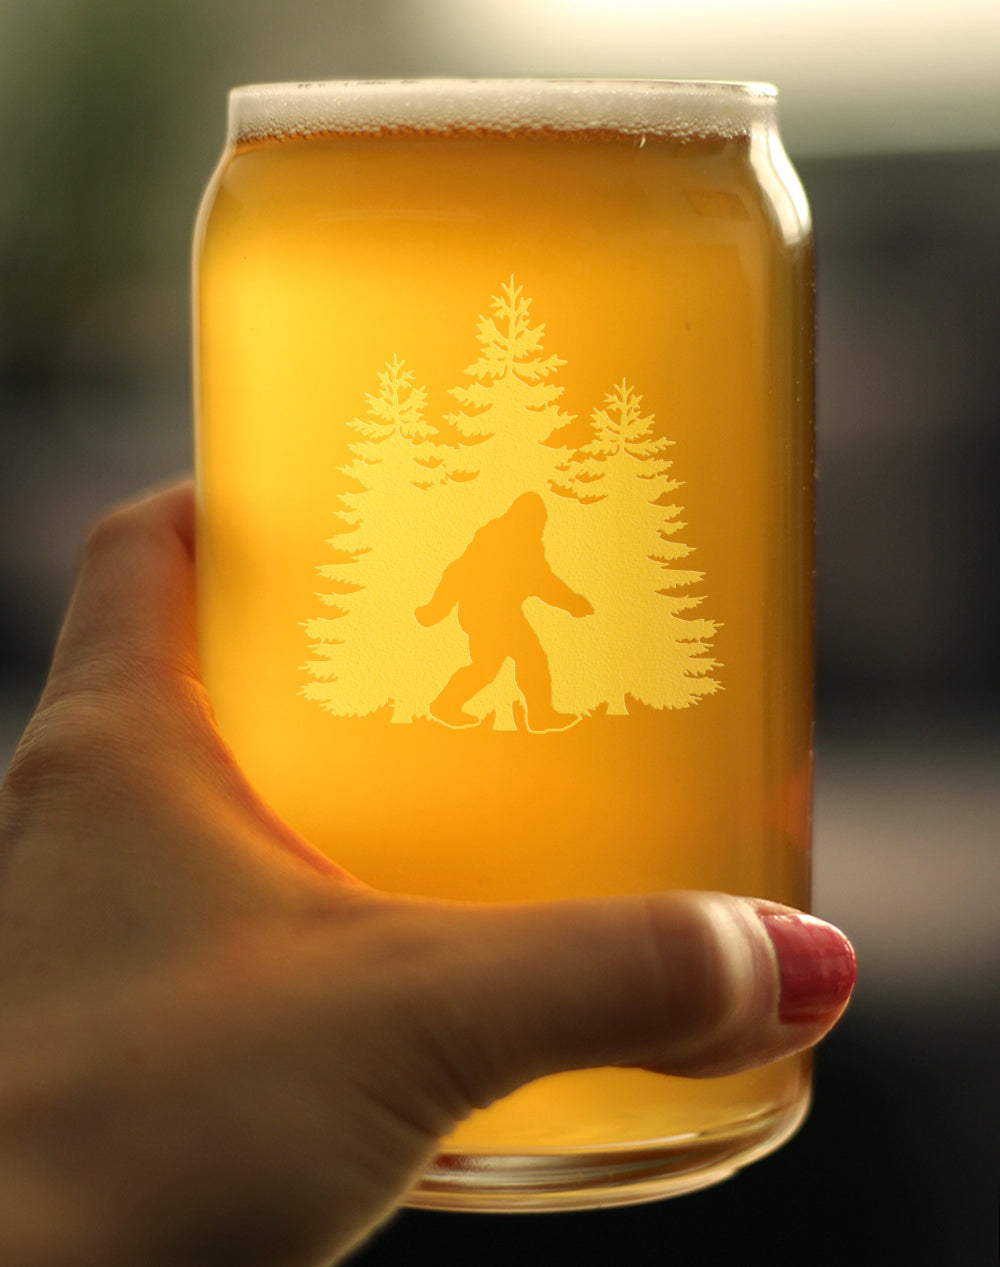 Bigfoot Engraved Beer Can Pint Glass, Unique Sasquatch Themed Gifts, Funny Gift Idea for Outdoorsmen